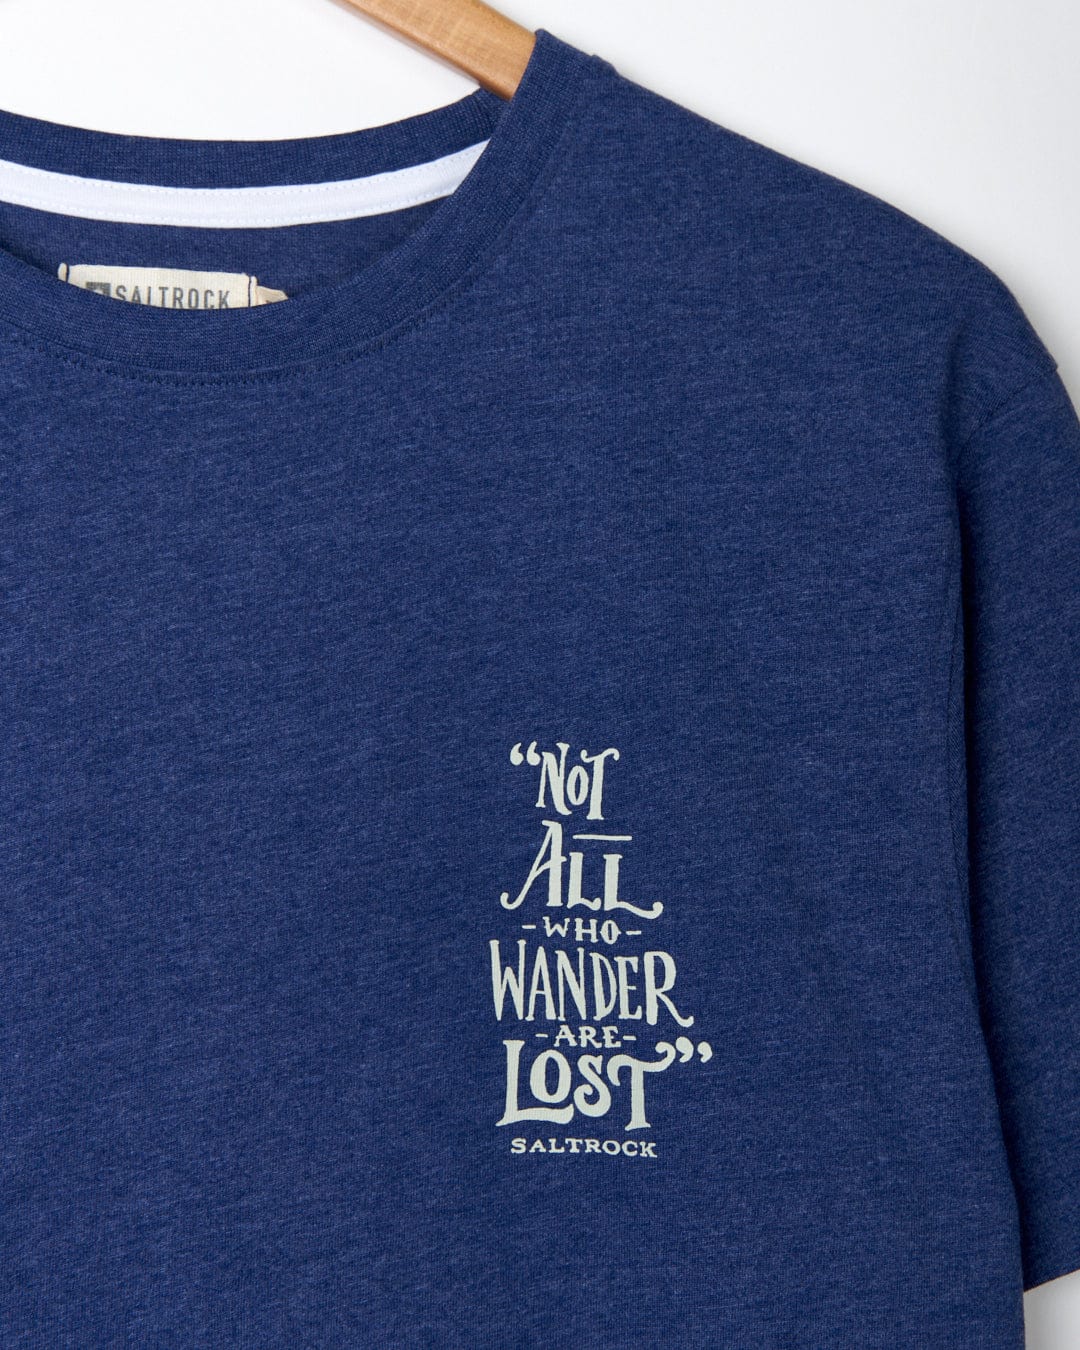 Blue Lost Ships - Mens Short Sleeve T-Shirt with the quote "not all who wander are lost" from Saltrock, displayed on a hanger.